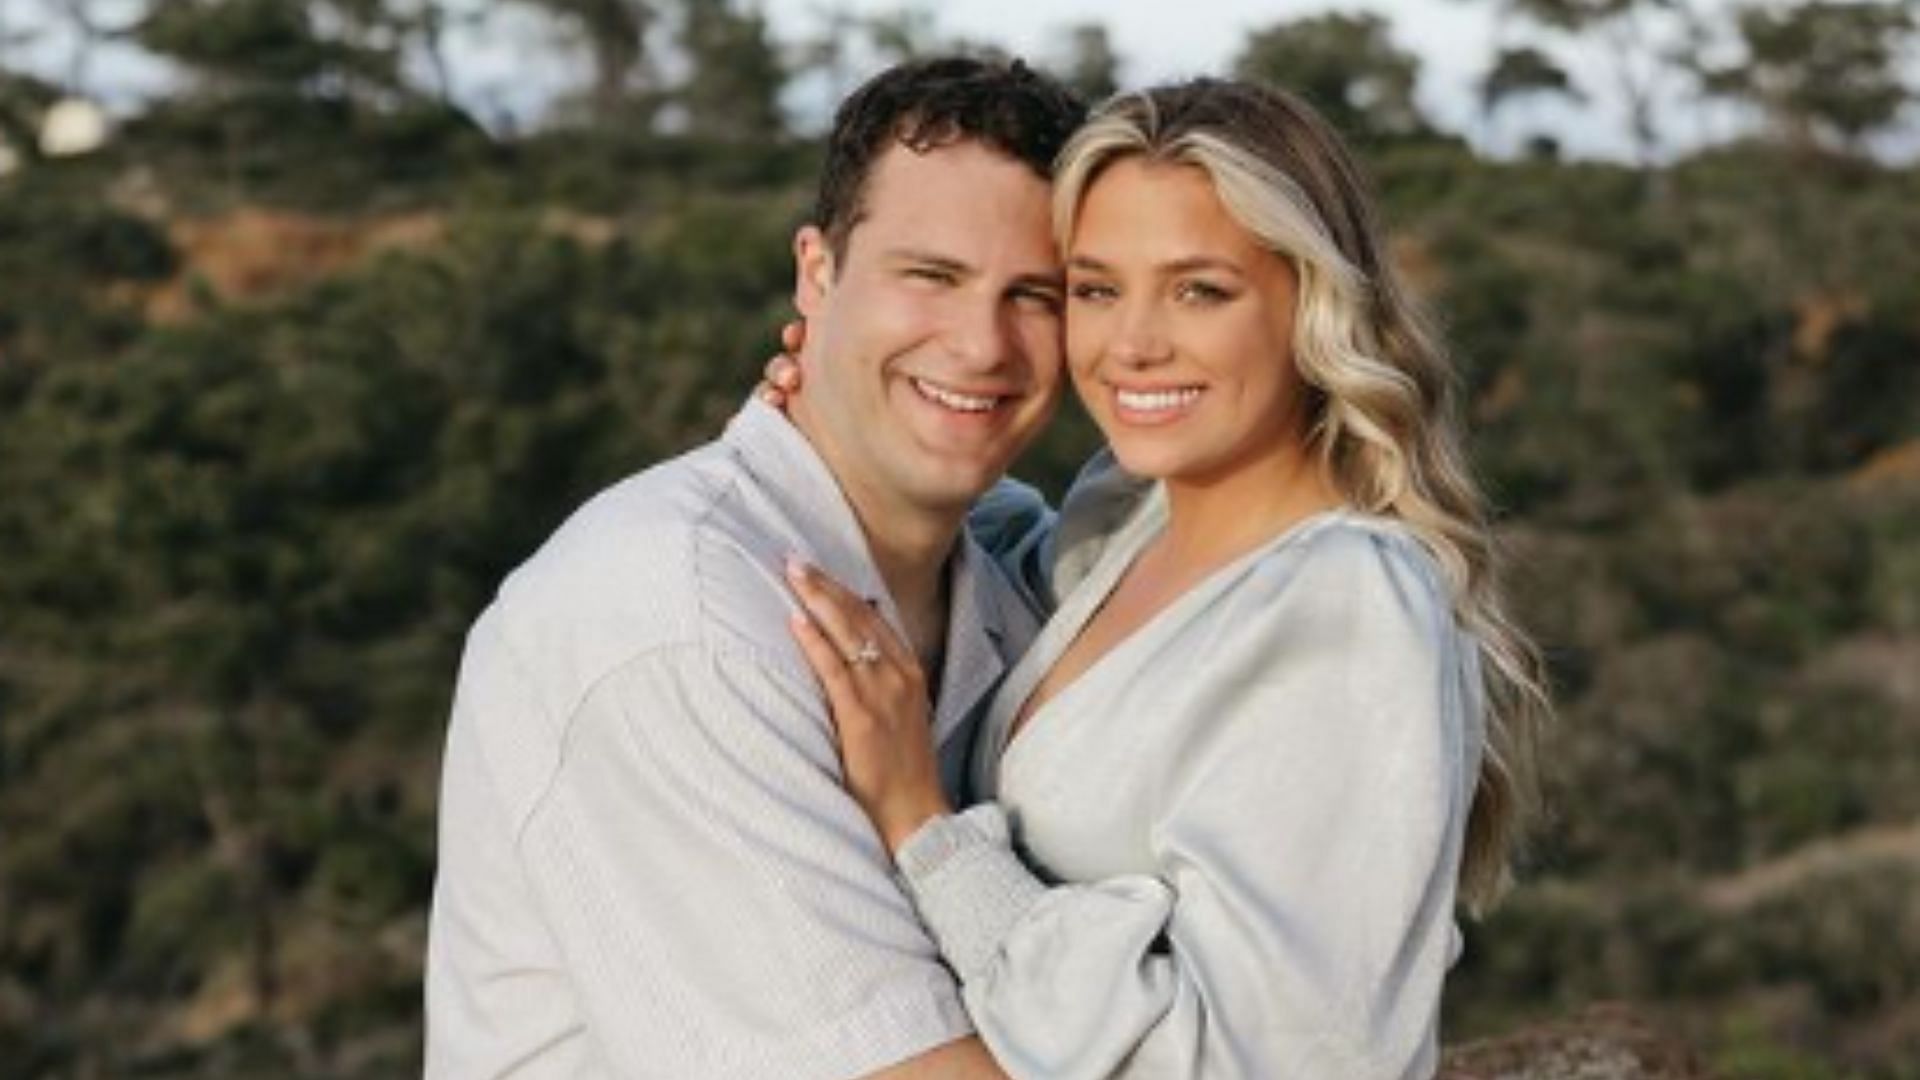 Sam LaPorta recently got engaged to his longtime girlfriend Callie Dellinger. 